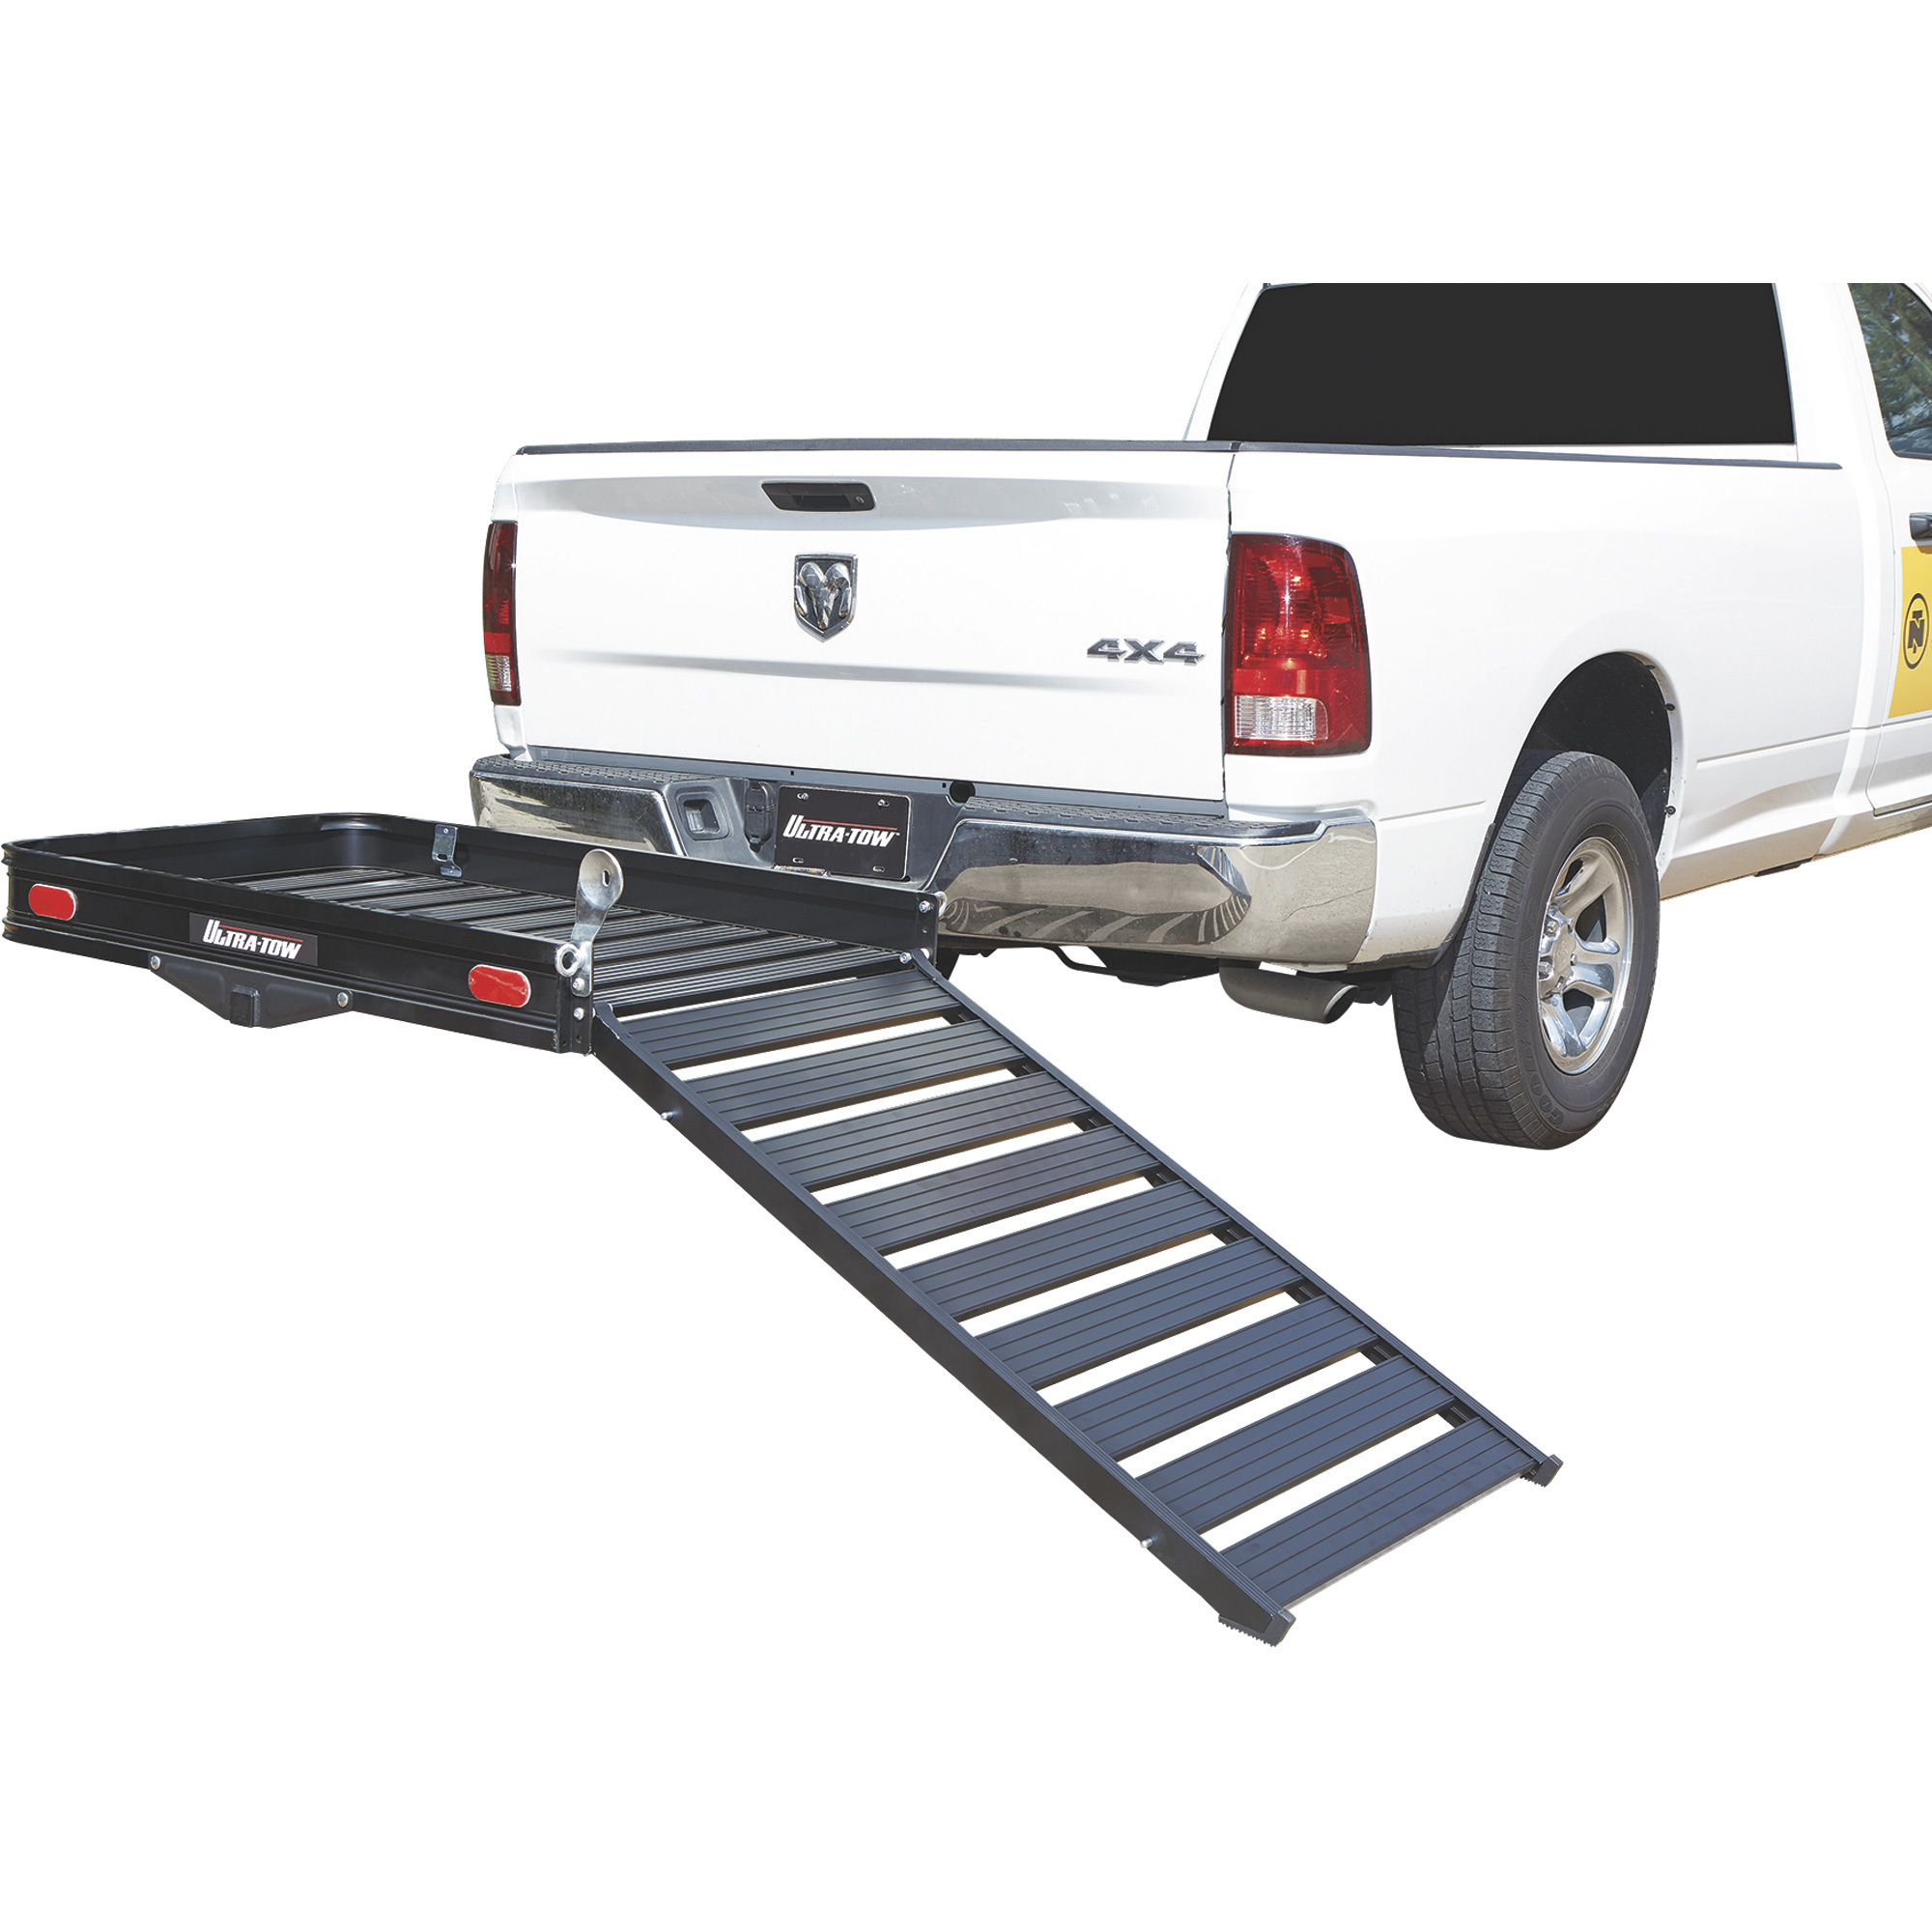 Ultra-Tow Aluminum Hitch Cargo Carrier with Ramp, 500-Lb. Capacity, Black, 60Inch x 30Inch x 4Inch